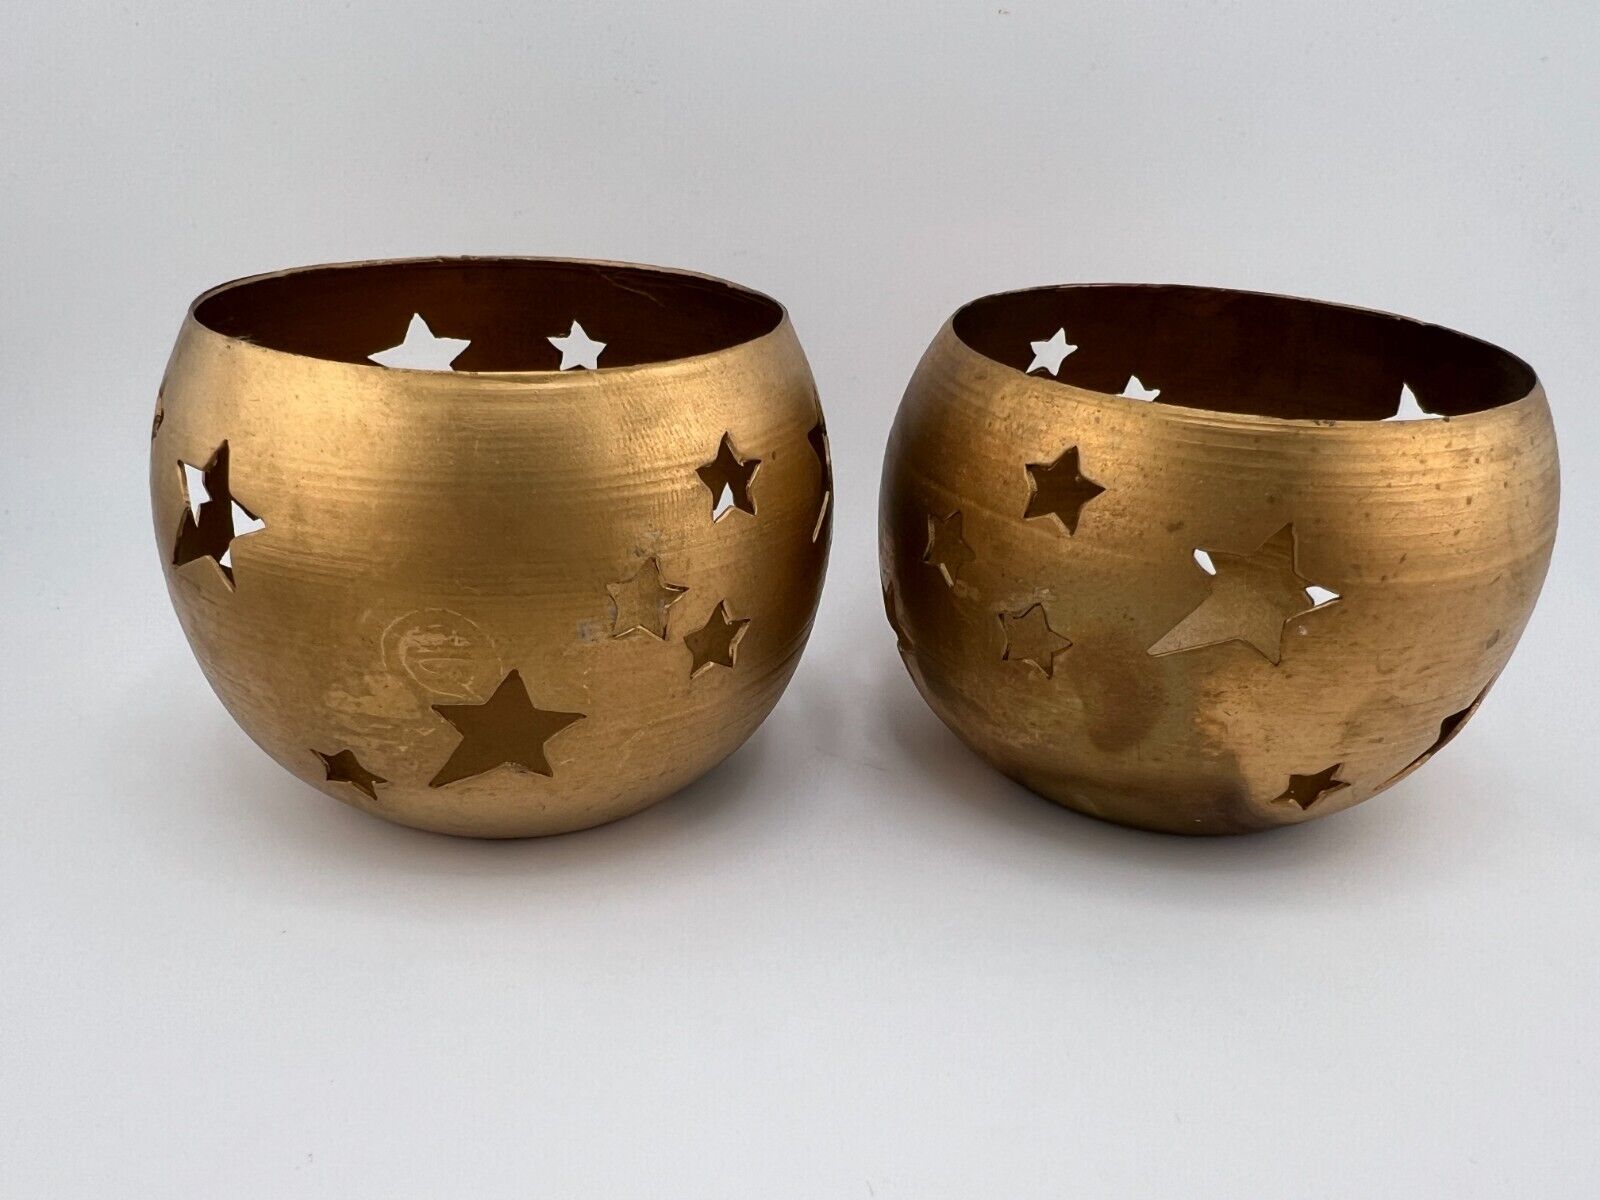 Vintage Durable Brass Home Decorative Cut-Out Star Candle Holders - Set of 2